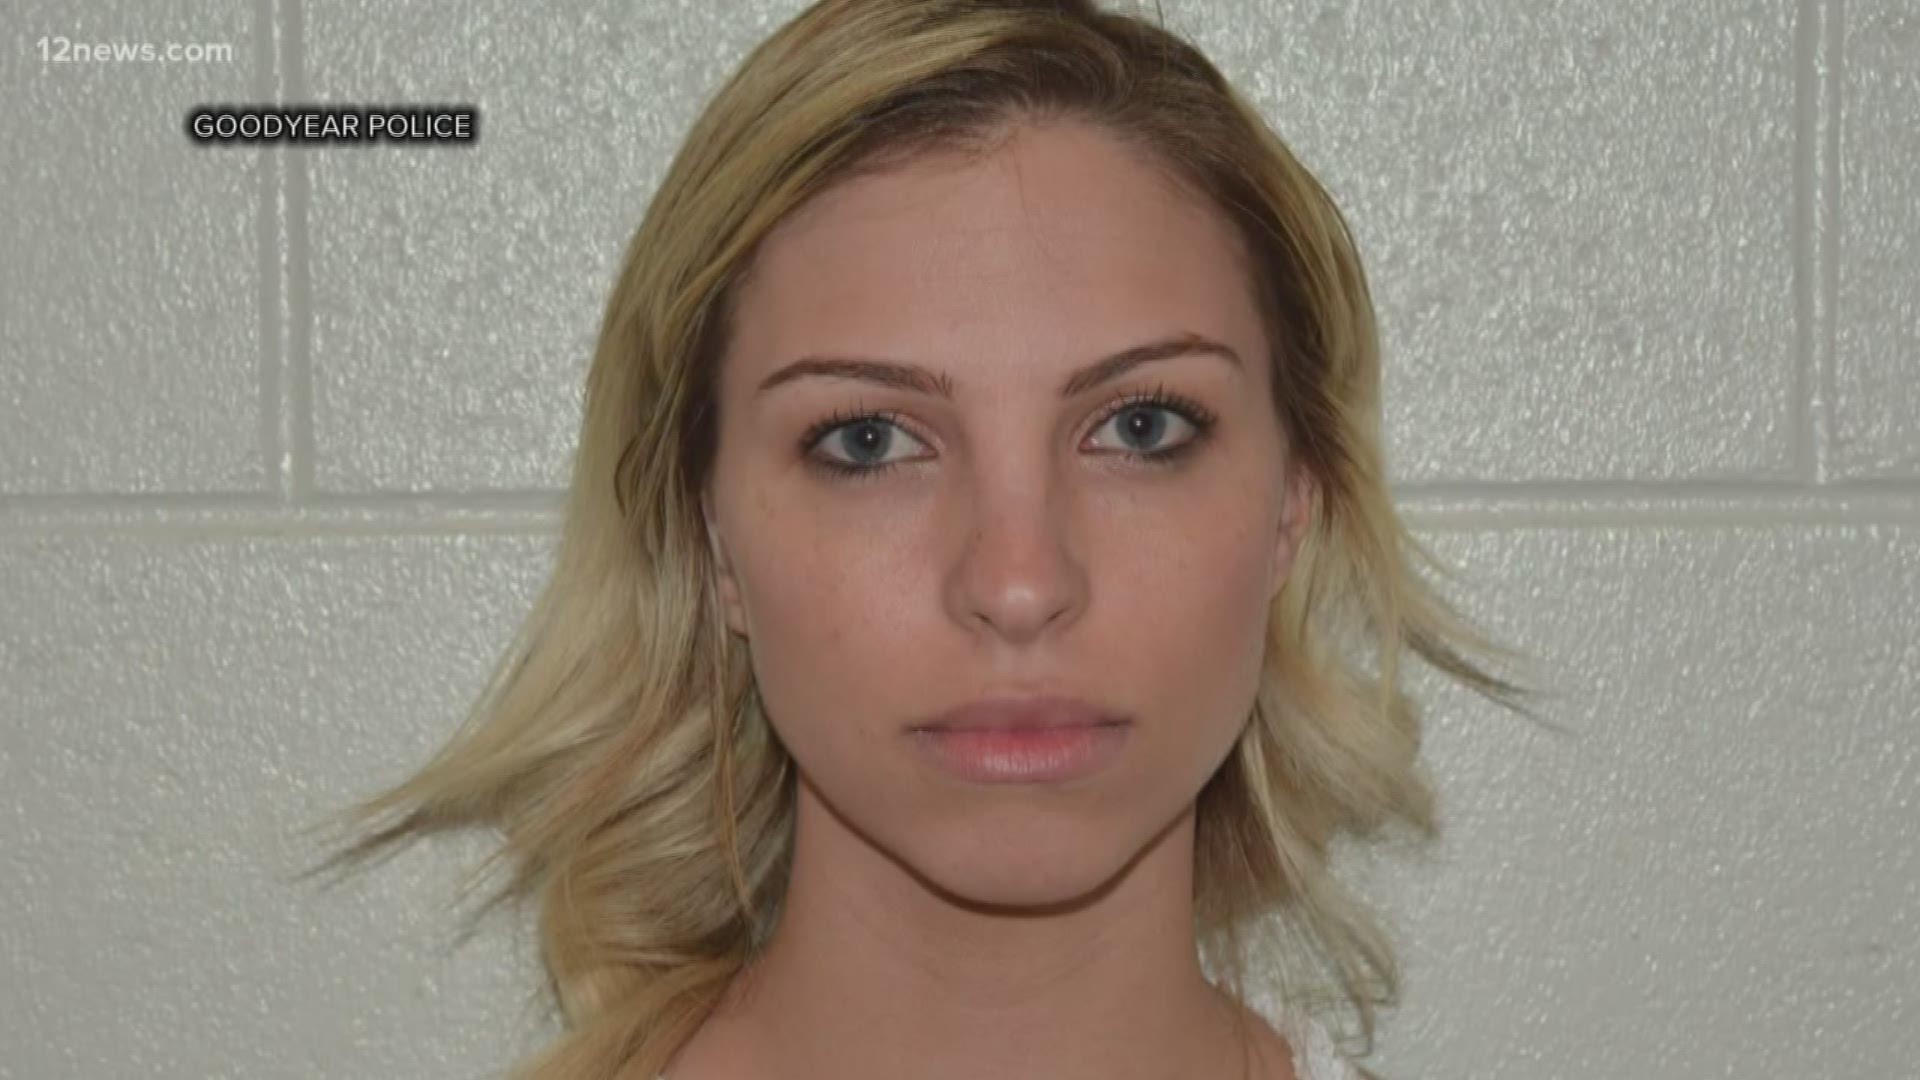 Brittany Zamora, a 6th-grade teacher accused of sexually abusing a 13-year-old student, took a plea deal in a last-minute hearing Monday afternoon. Zamora is pleading guilty to three felonies, including sexual conduct with a minor, attempted molestation and public indecency.